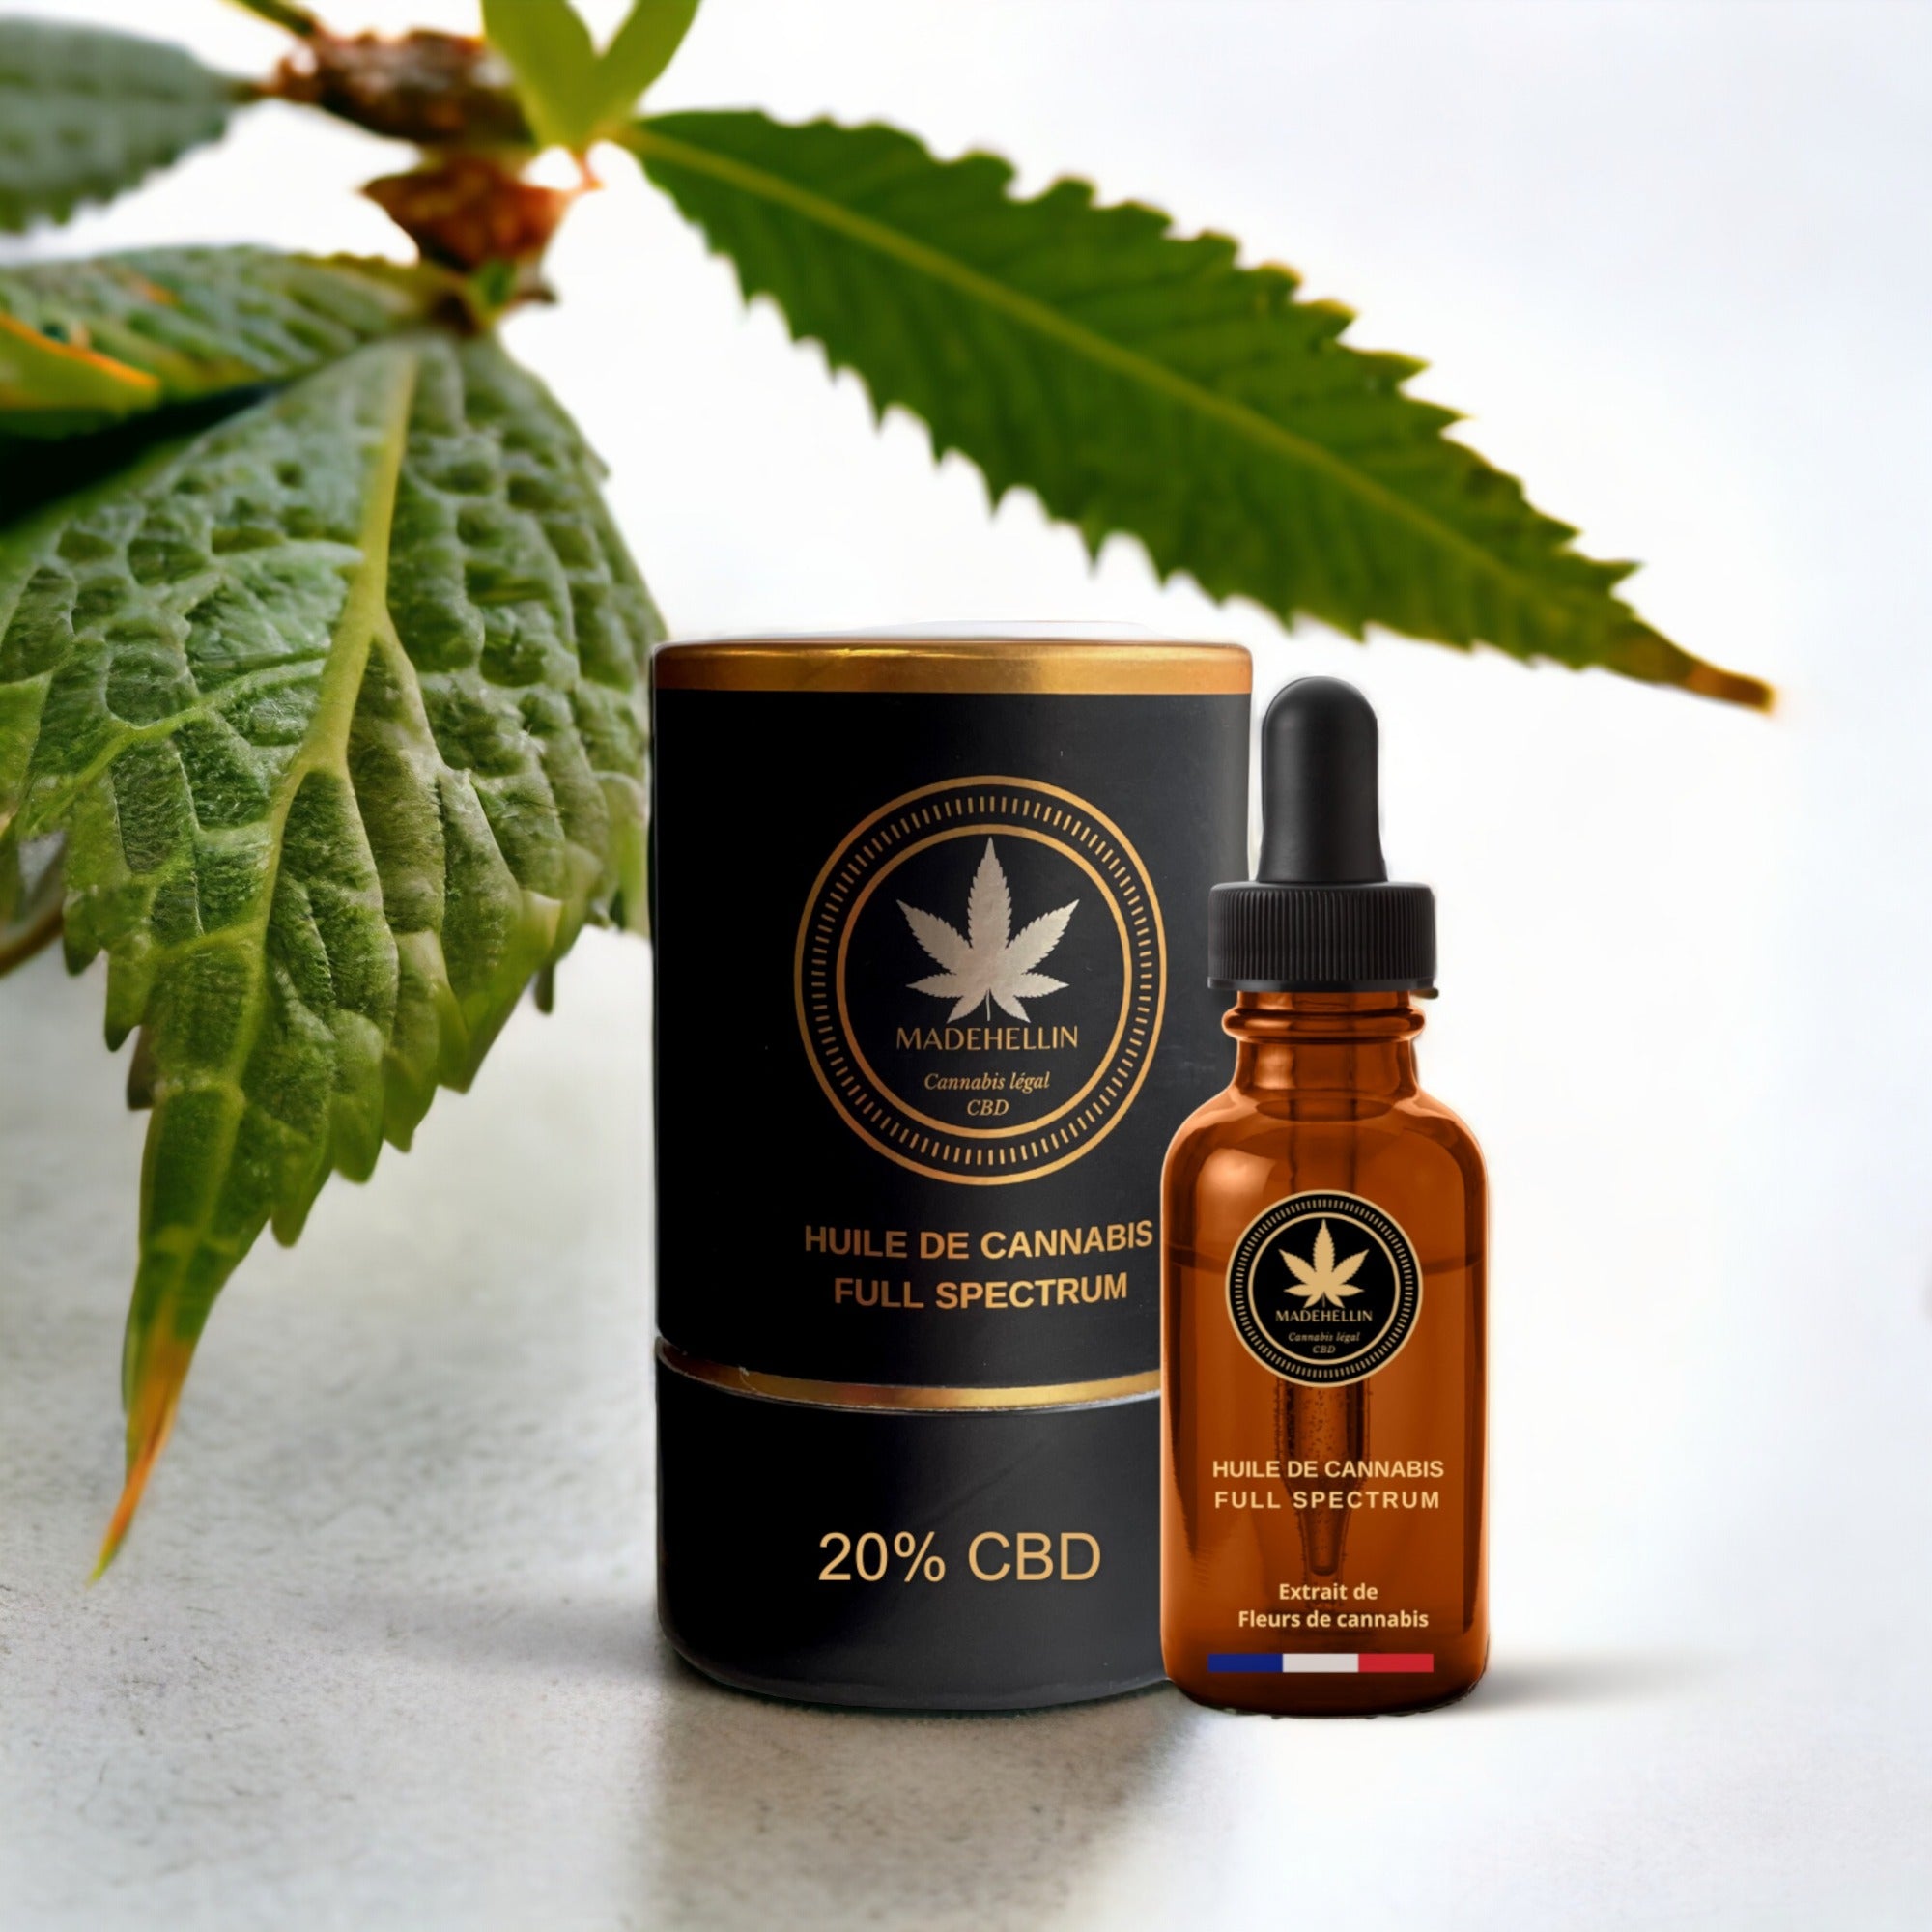 Full Spectrum 20% CBD Oil from Madehellin - Power and Well-being